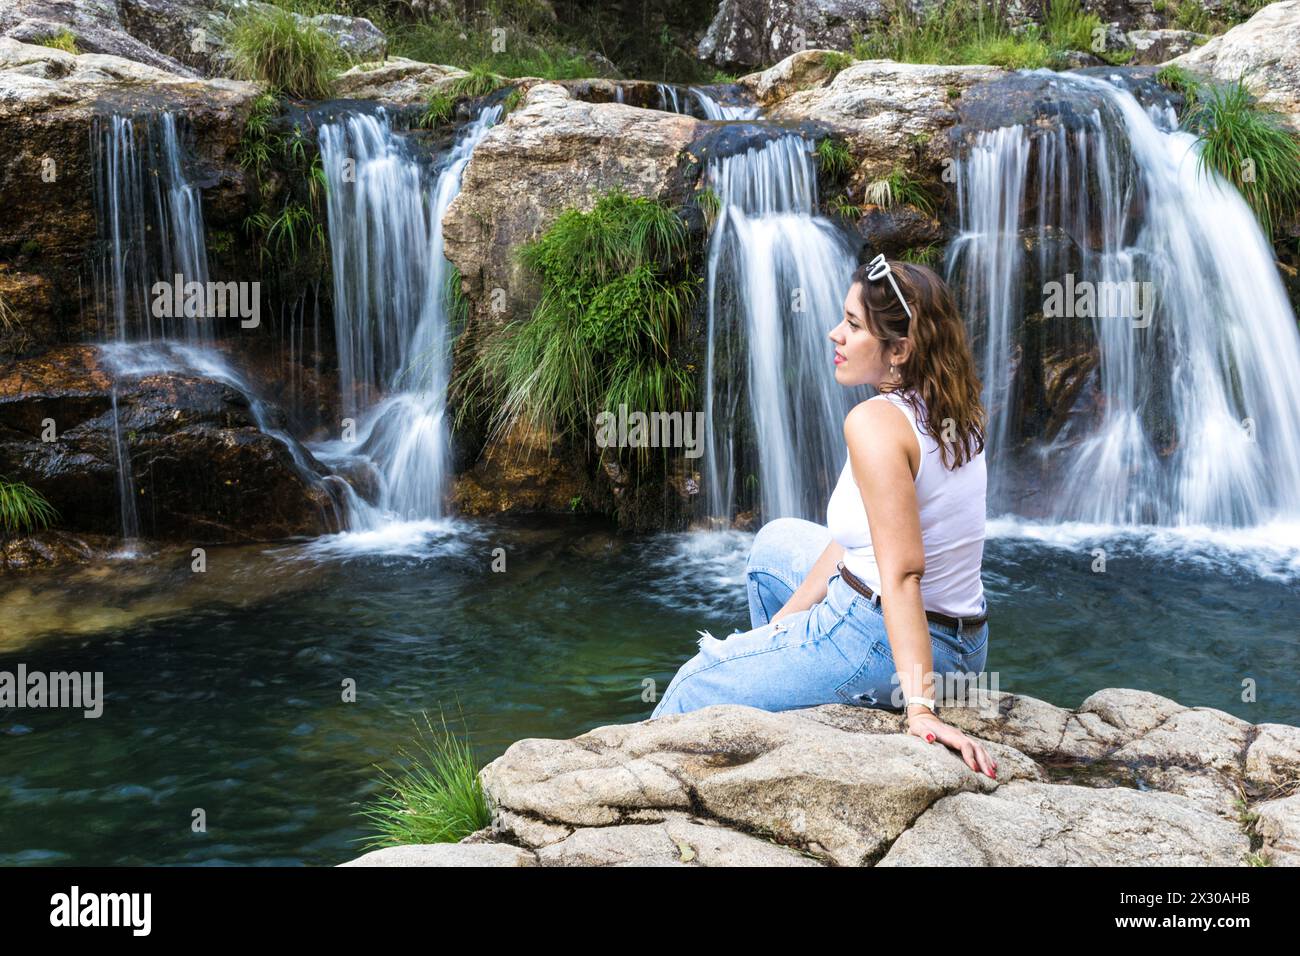 Modern woman sitting on a rock in front of a waterfall in a forest Stock Photo